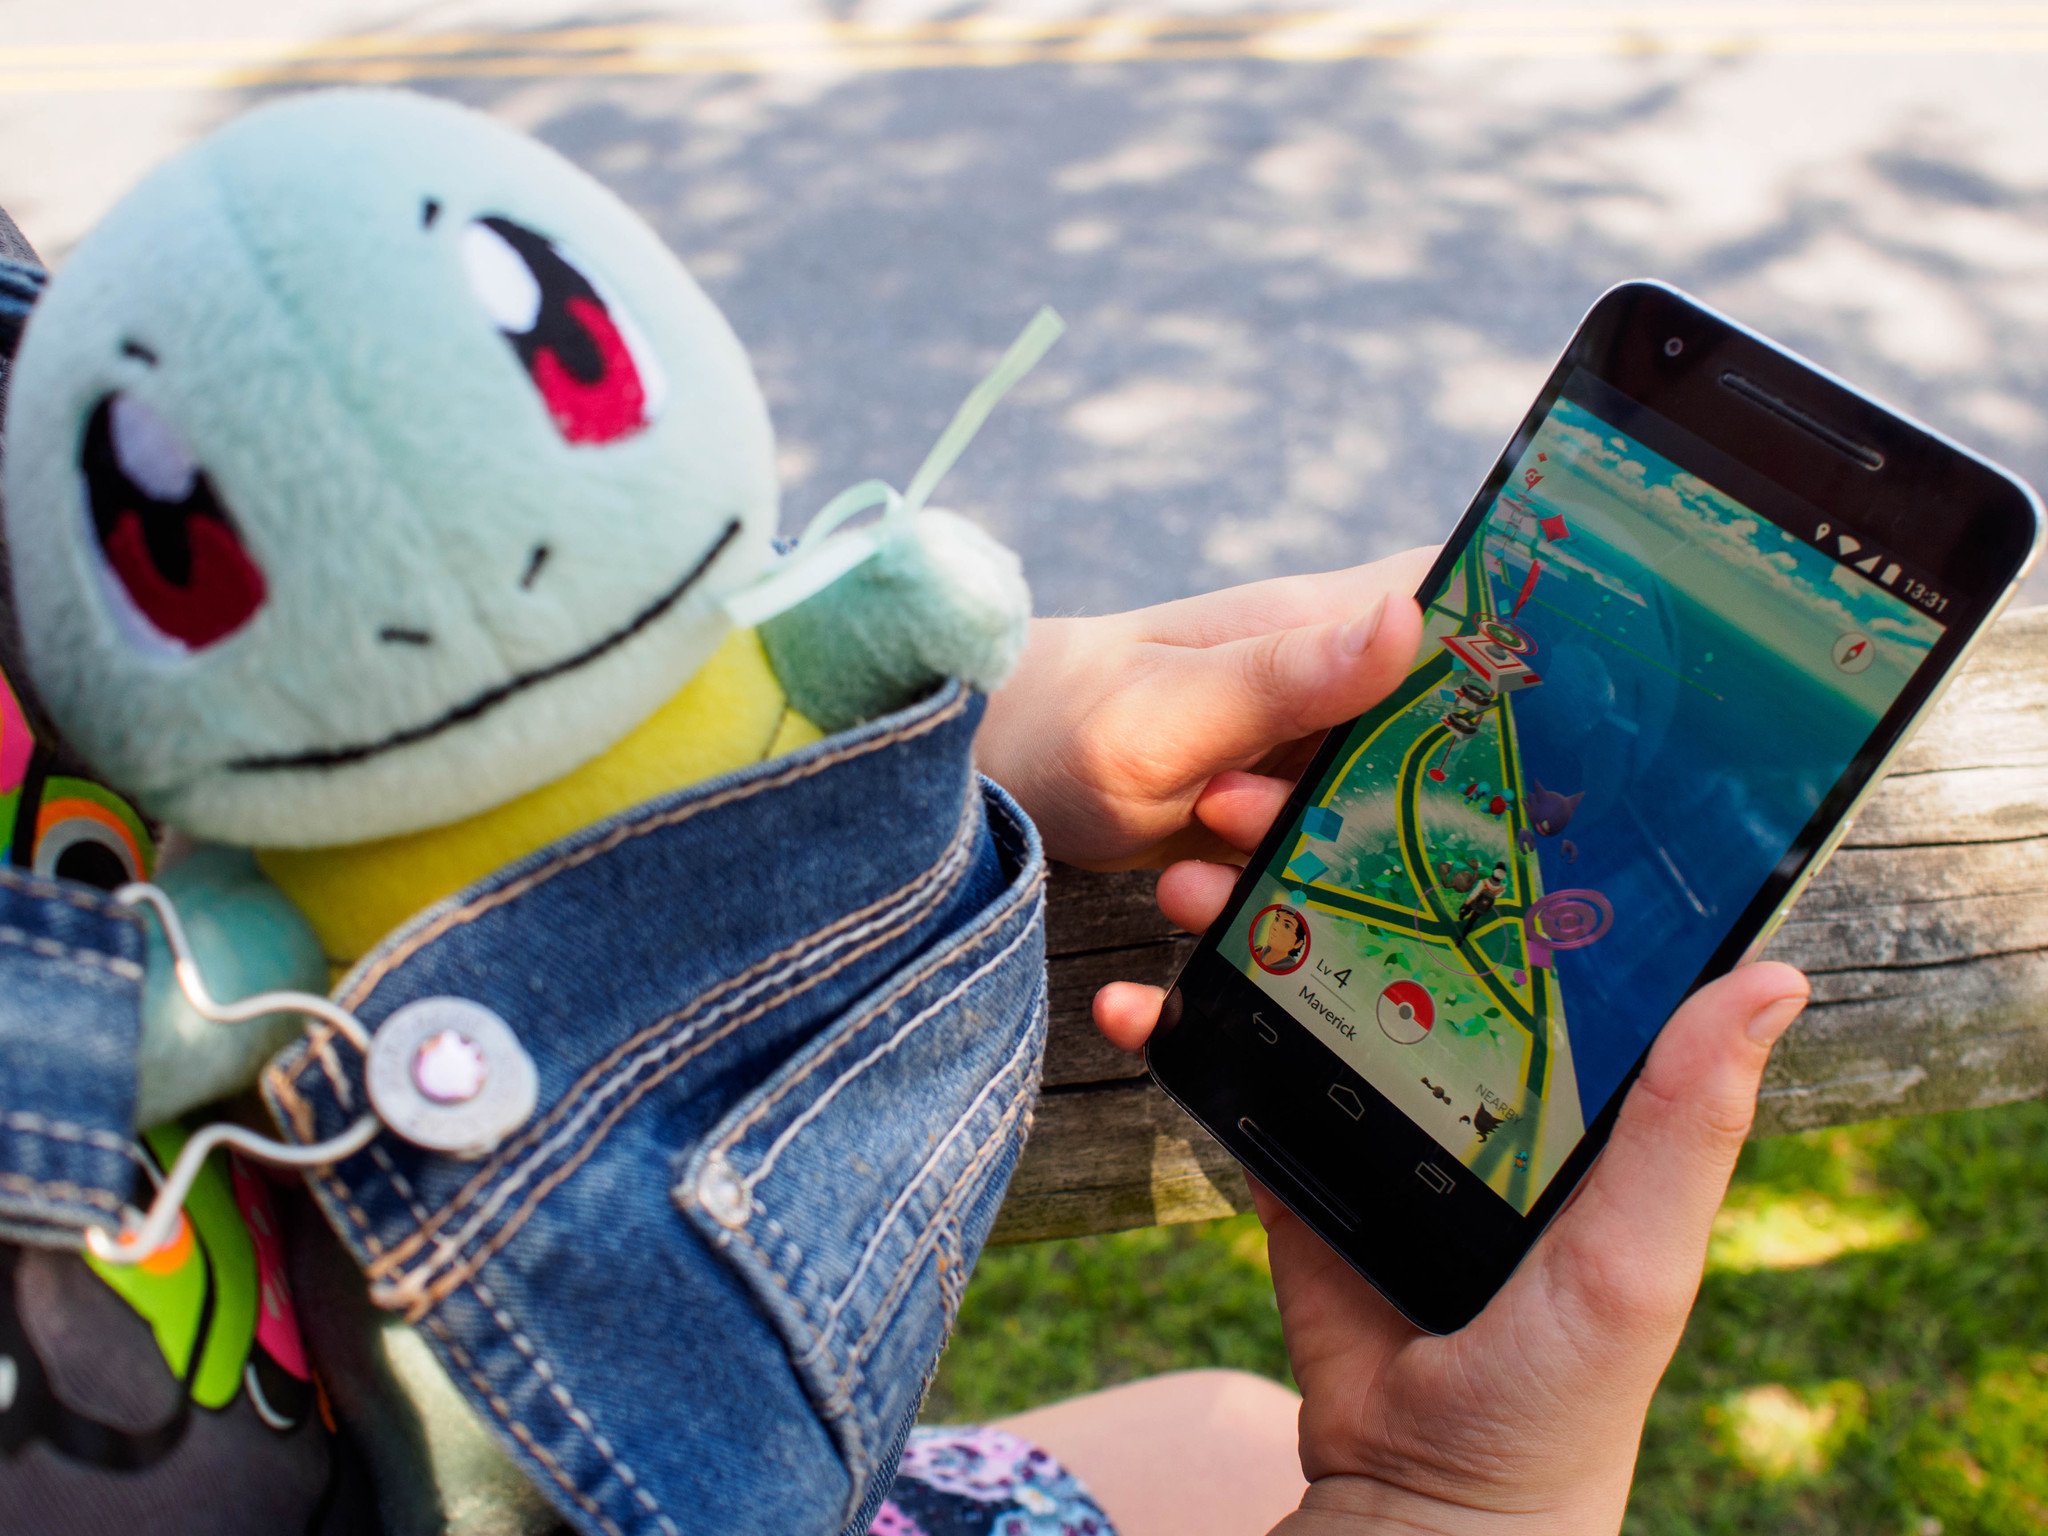 How to Complete the Finding Your Voice Quest in Pokémon GO